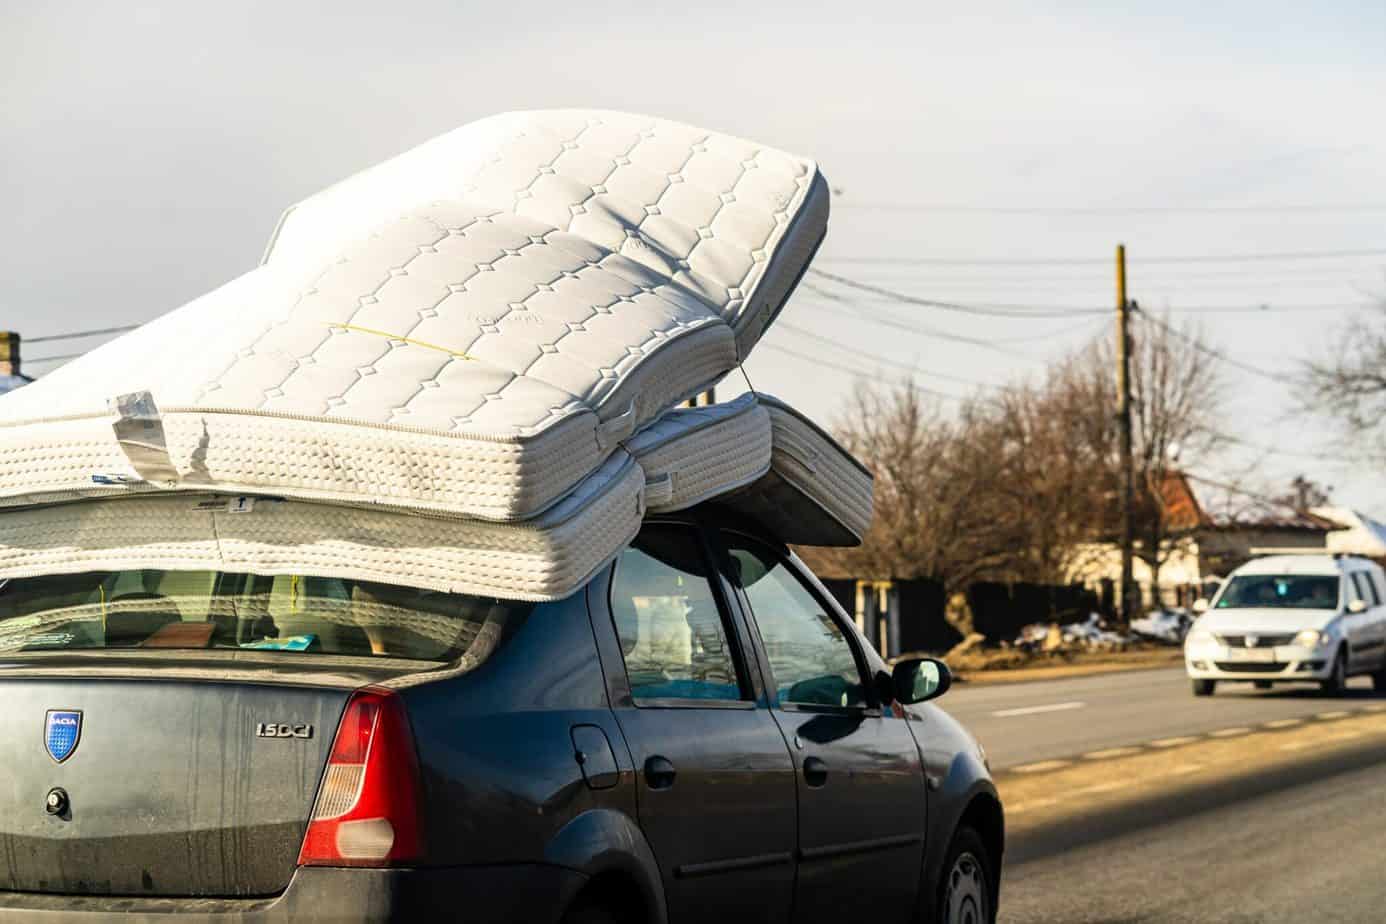 moving mattress on top of car